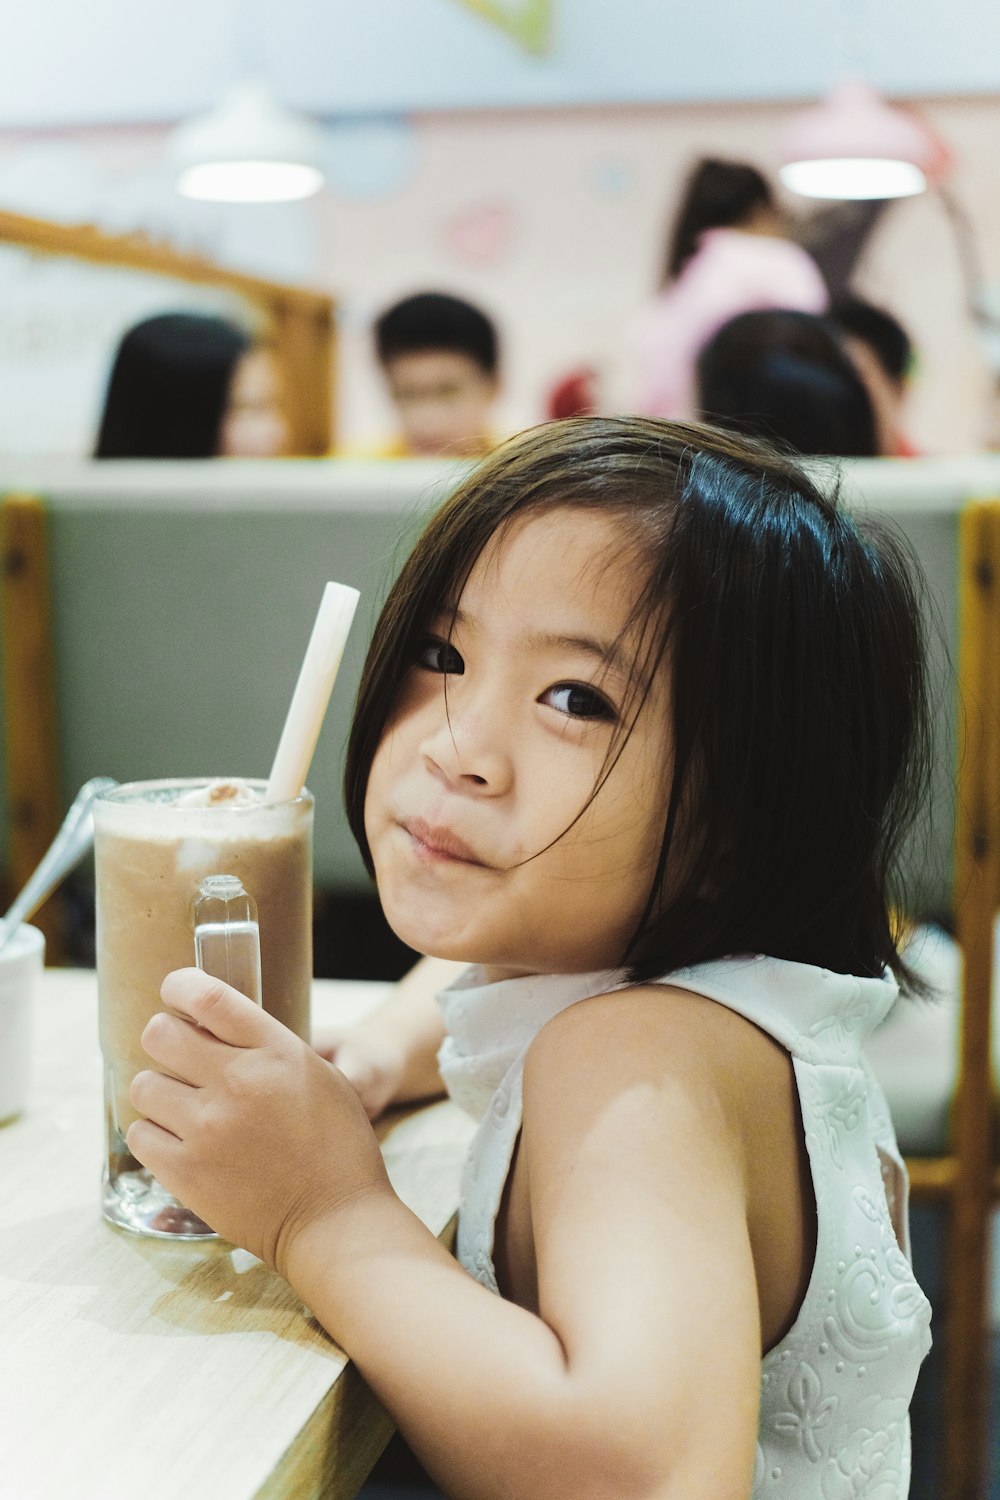 girl holding cup filled with black liquid